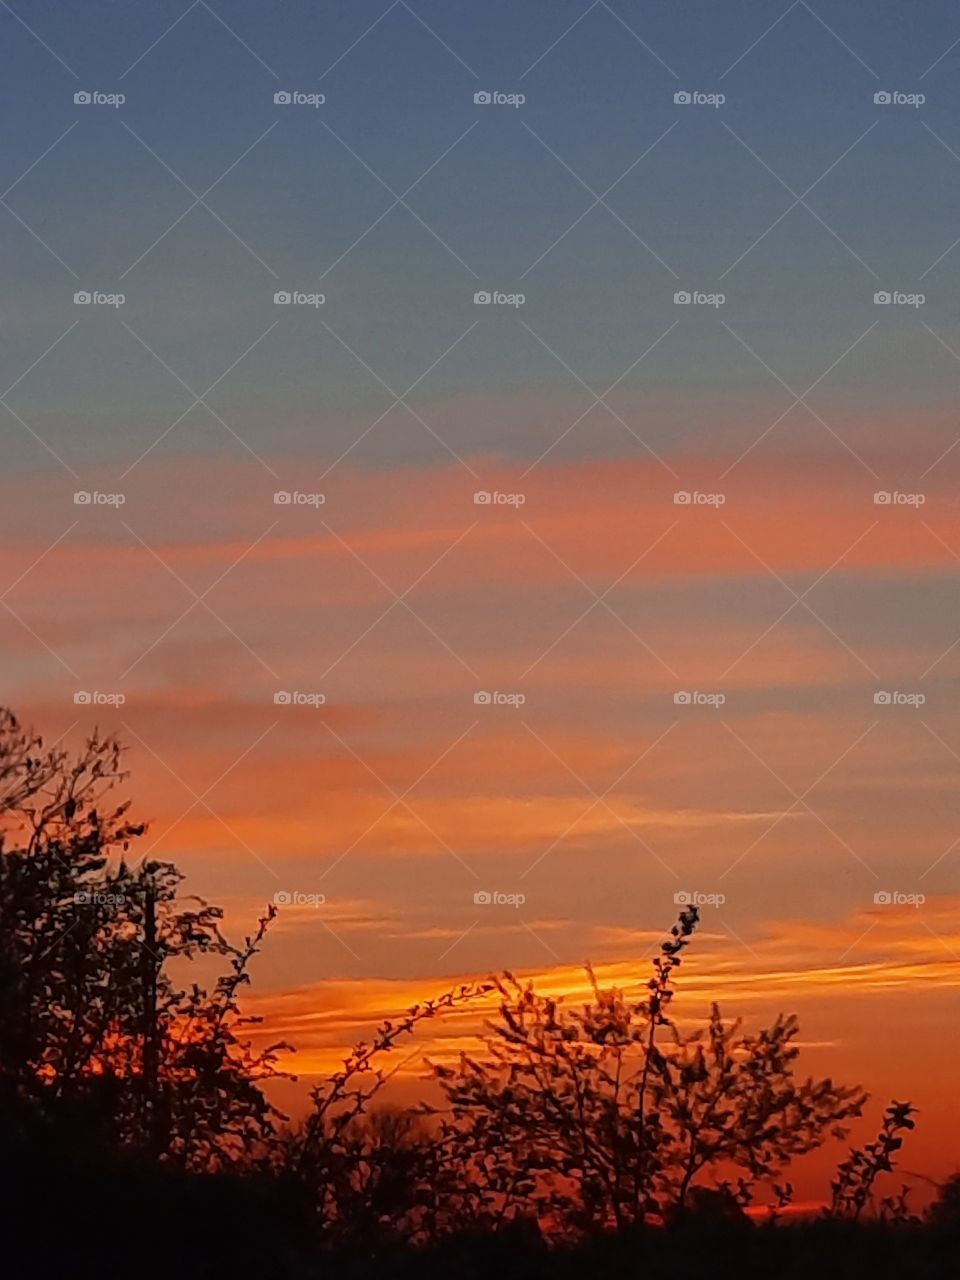 orange sunrise  with paralel  clouds  and black silhouettes of trees